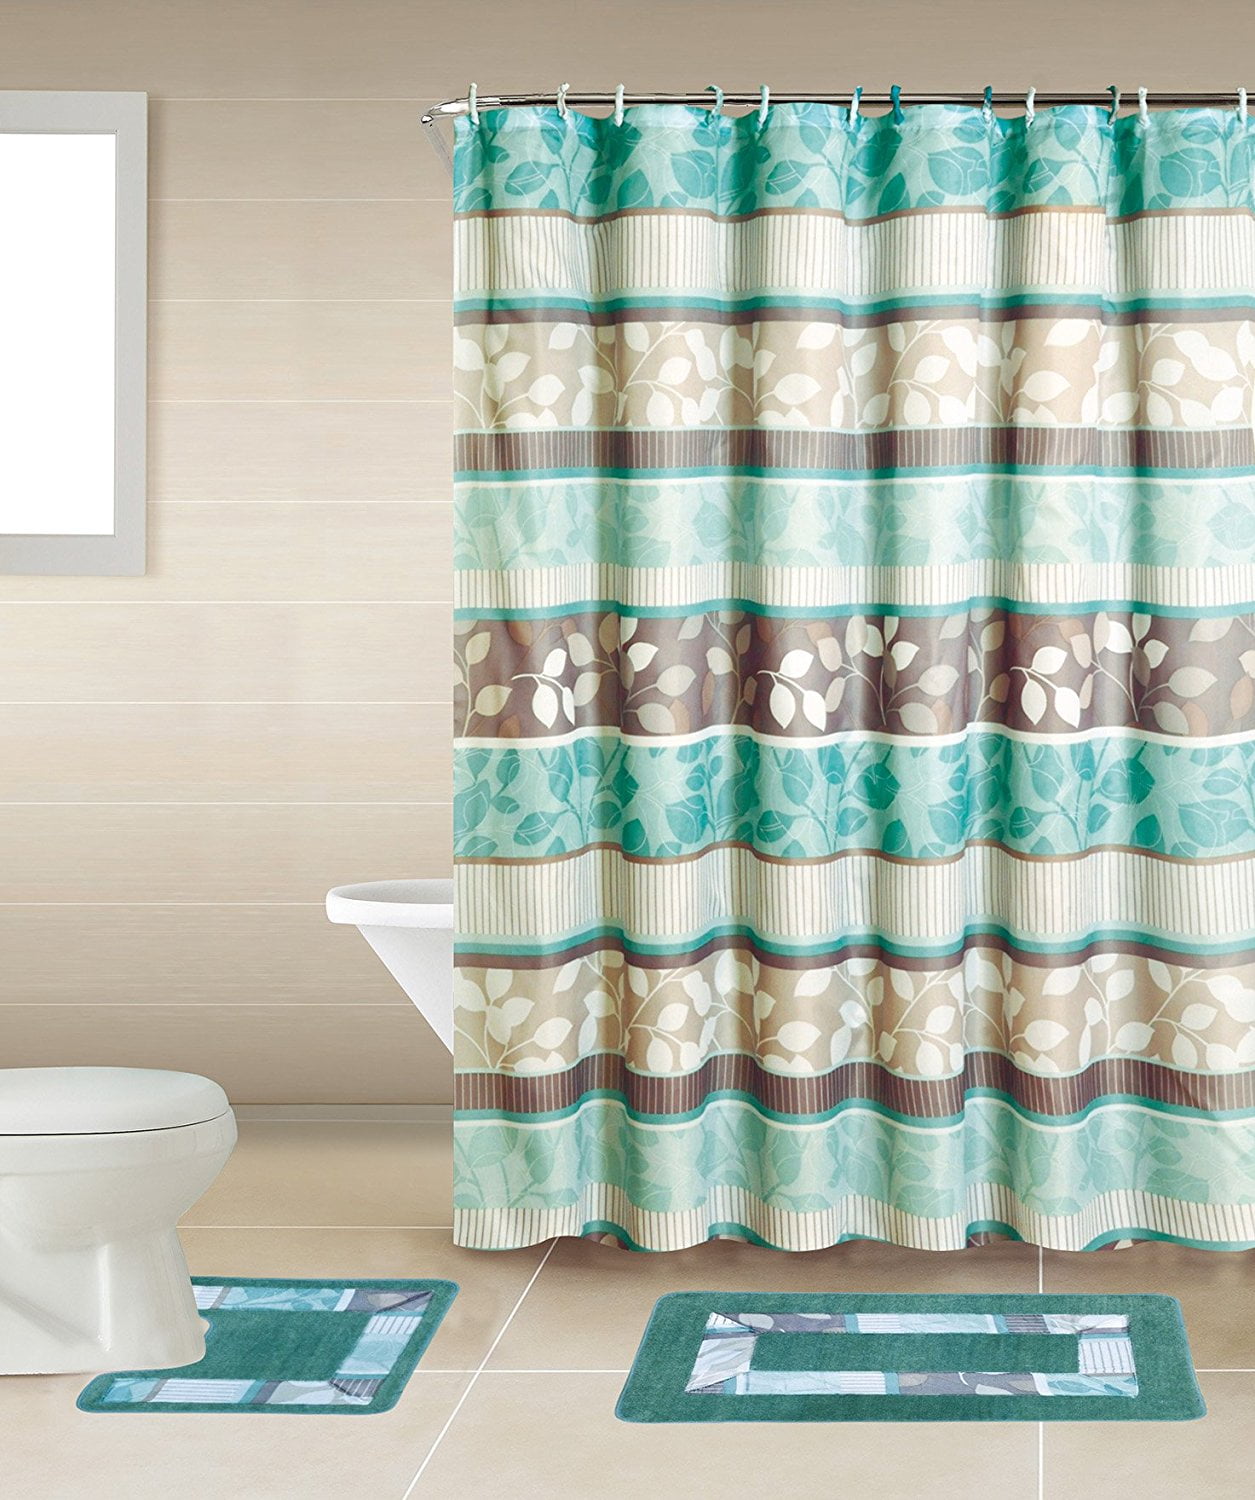 Details about   Falling Yellow Leaves In Autumn Shower Curtain Bath Toilet Pad Cover Bath Mat 